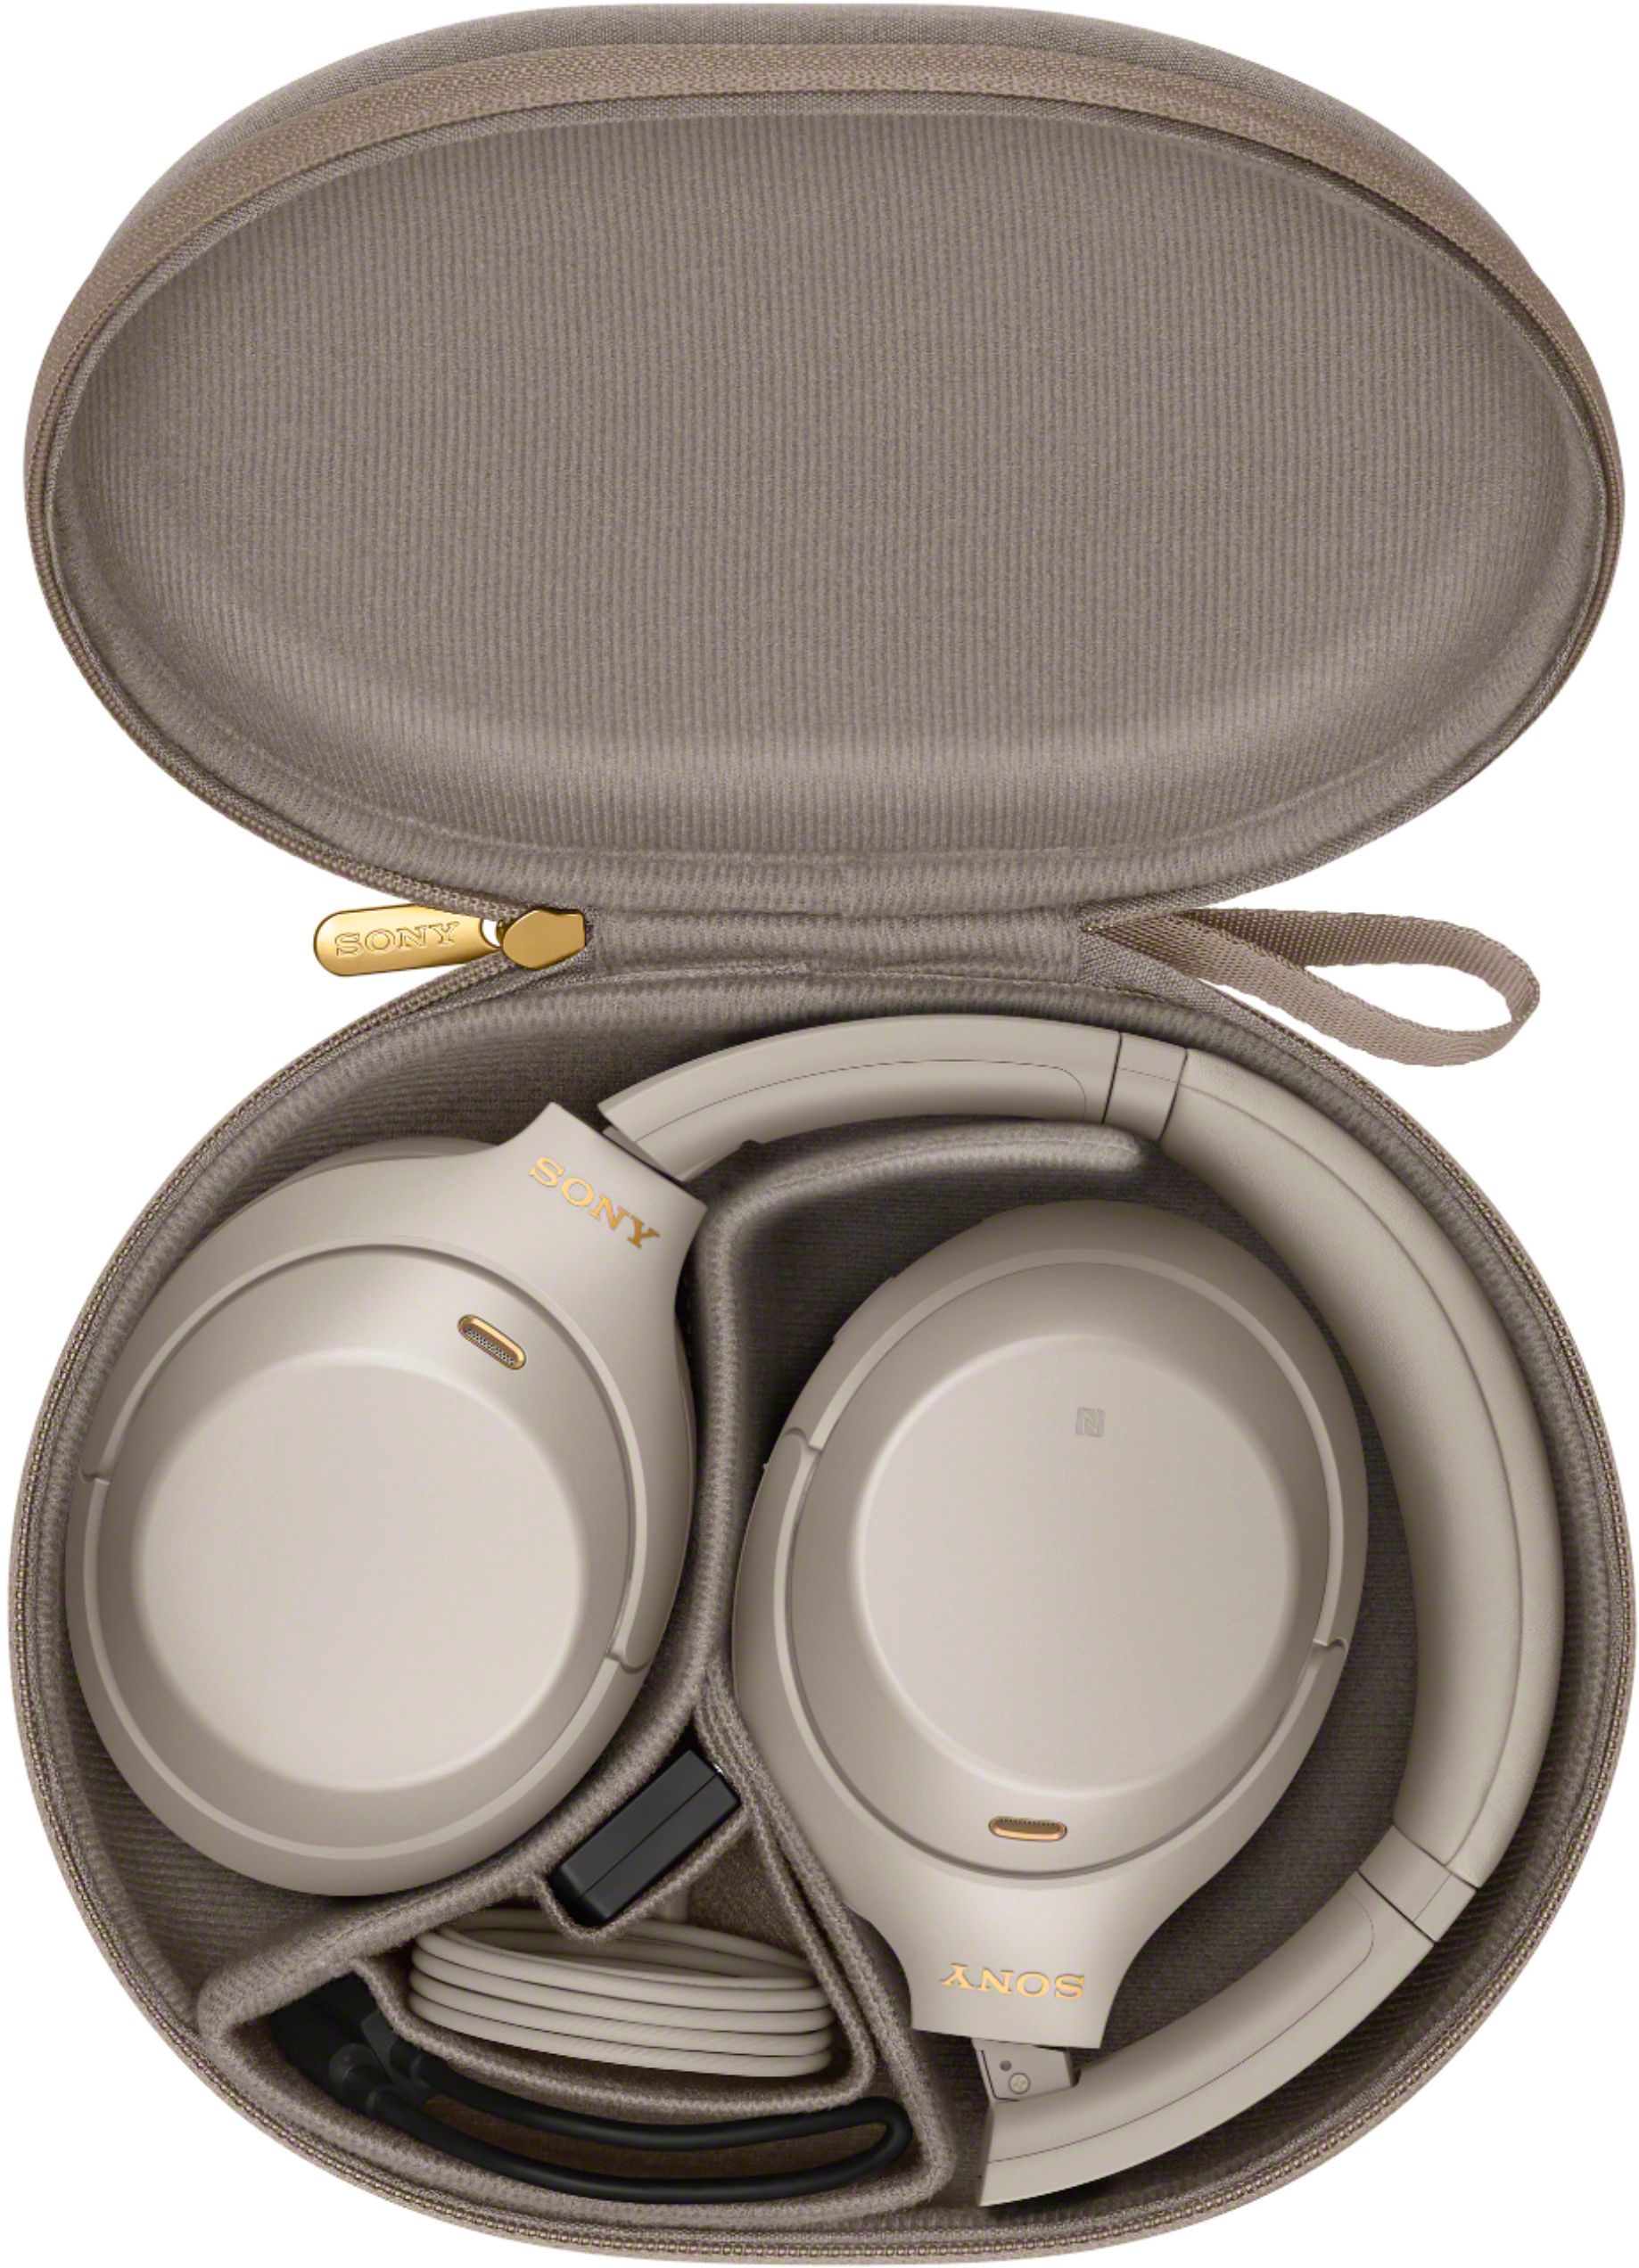 Sony WH1000XM4 Wireless Noise-Cancelling Over-the-Ear Headphones Silver  WH1000XM4/S - Best Buy